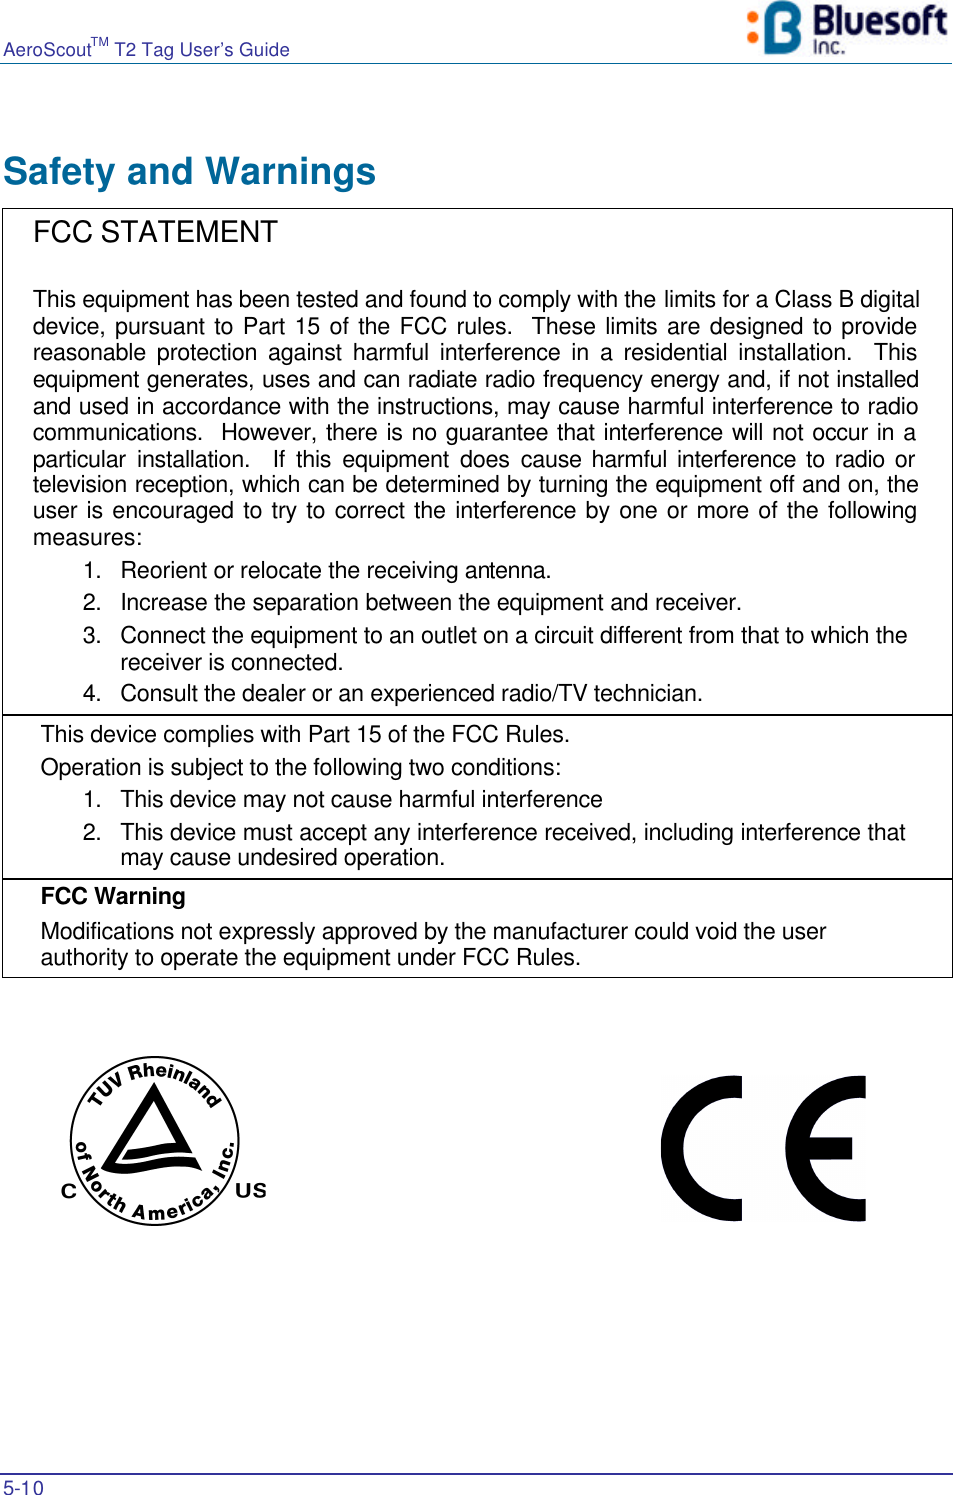 AeroScoutTM T2 Tag User’s Guide    5-10   Safety and Warnings  FCC STATEMENT  This equipment has been tested and found to comply with the limits for a Class B digital device, pursuant to Part 15 of the FCC rules.  These limits are designed to provide reasonable protection against harmful interference in a residential installation.  This equipment generates, uses and can radiate radio frequency energy and, if not installed and used in accordance with the instructions, may cause harmful interference to radio communications.  However, there is no guarantee that interference will not occur in a particular installation.  If this equipment does cause harmful interference to radio or television reception, which can be determined by turning the equipment off and on, the user is encouraged to try to correct the interference by one or more of the following measures: 1. Reorient or relocate the receiving antenna. 2. Increase the separation between the equipment and receiver. 3. Connect the equipment to an outlet on a circuit different from that to which the receiver is connected. 4. Consult the dealer or an experienced radio/TV technician. This device complies with Part 15 of the FCC Rules.                   Operation is subject to the following two conditions: 1. This device may not cause harmful interference 2. This device must accept any interference received, including interference that may cause undesired operation. FCC Warning  Modifications not expressly approved by the manufacturer could void the user authority to operate the equipment under FCC Rules.     